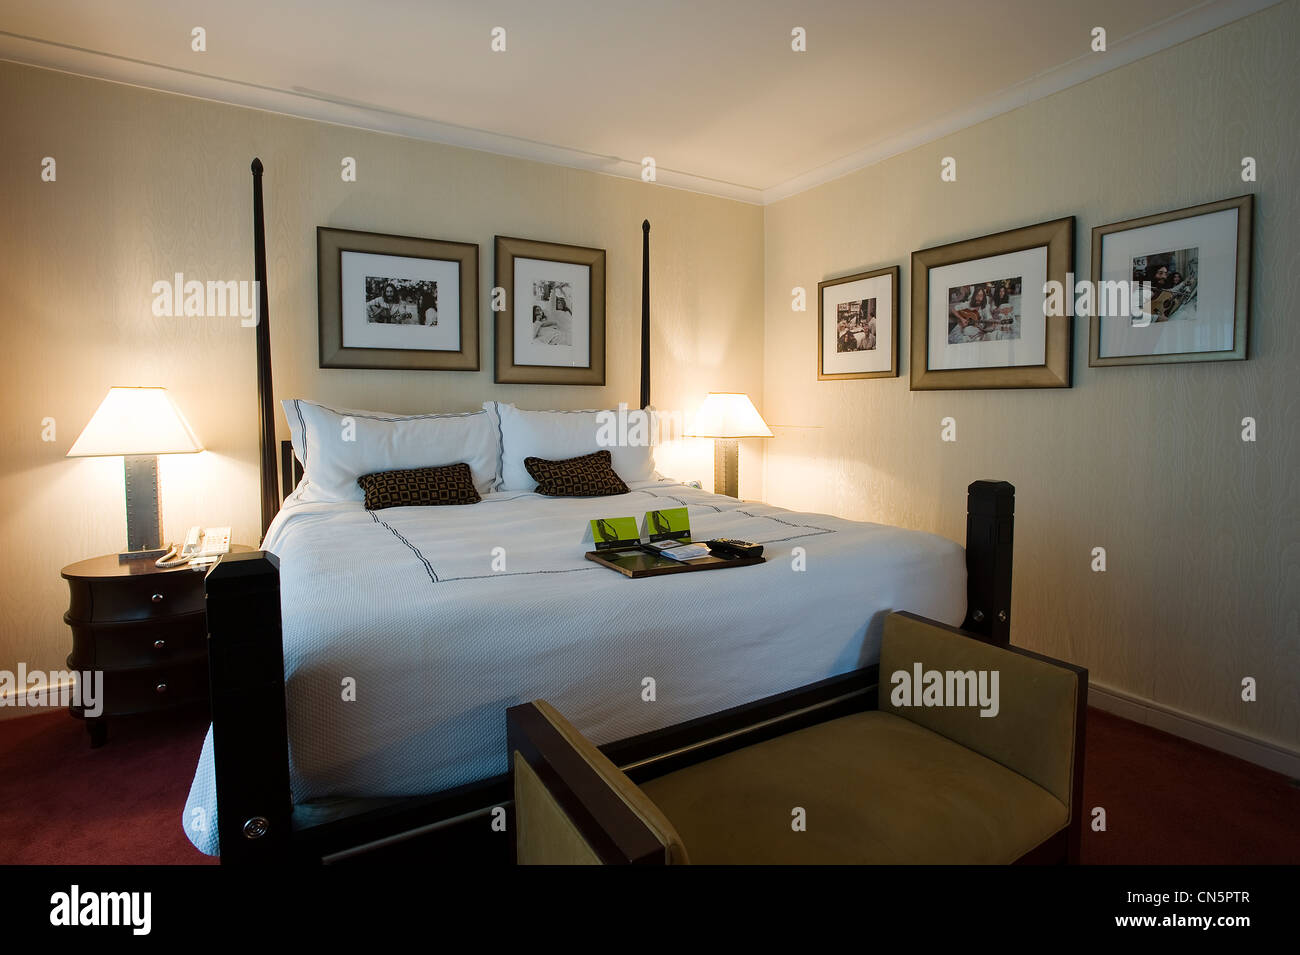 Canada, Quebec province, Montreal, the Queen Elizabeth Fairmont hotel, the room where John Lennon and Yoko Ono made their Stock Photo